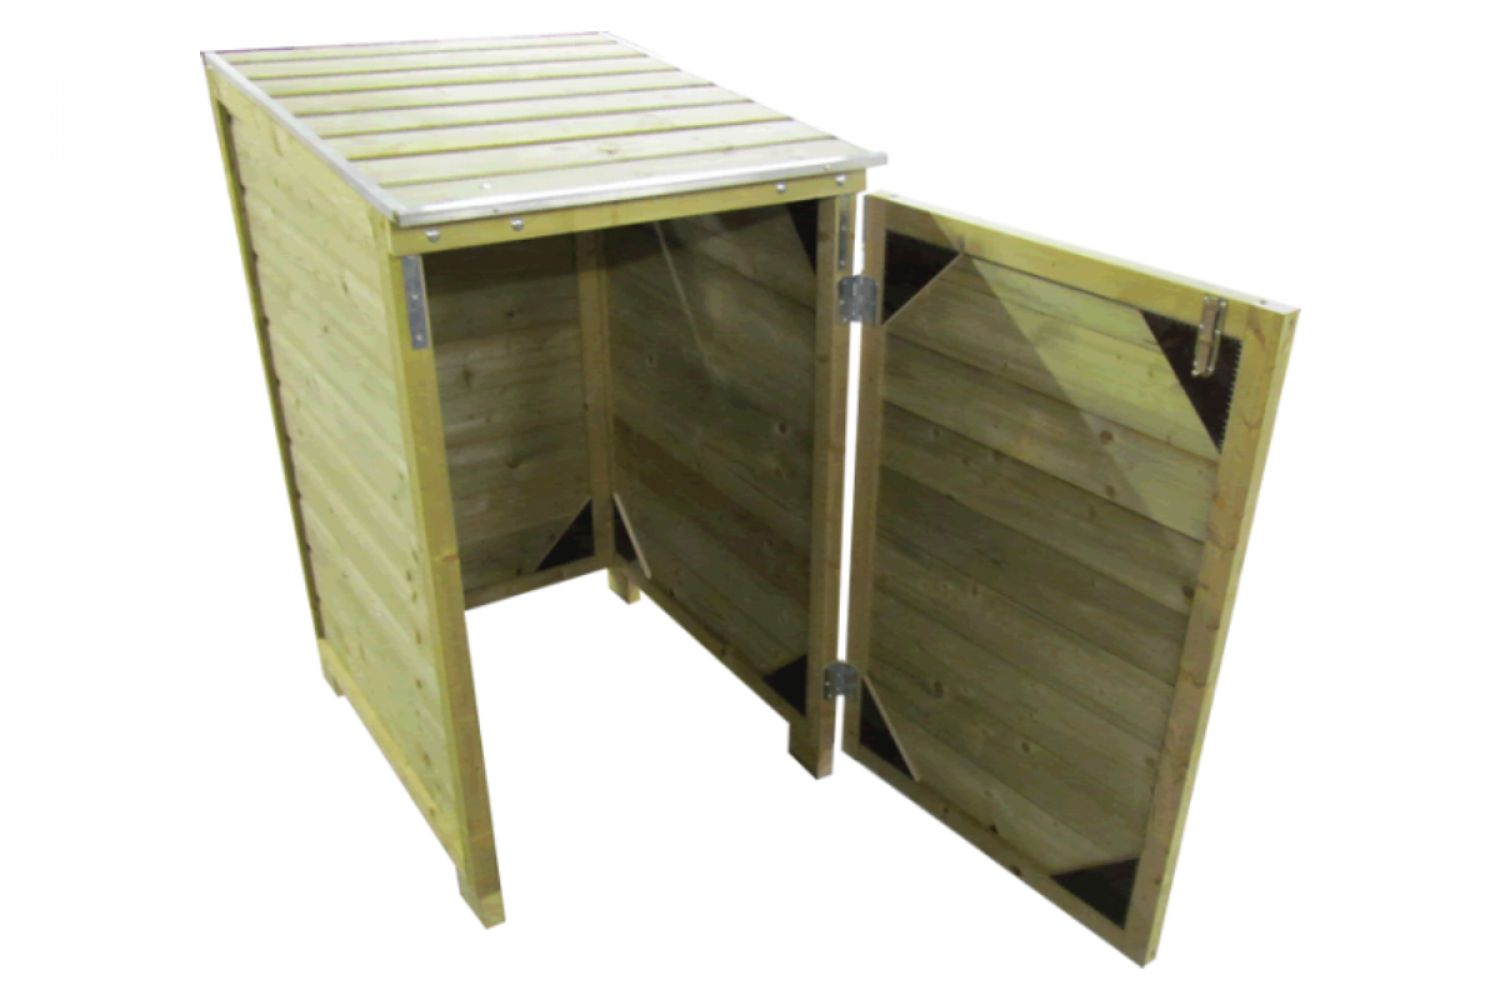 Containerberging 61x65x108,5 cm - 120L